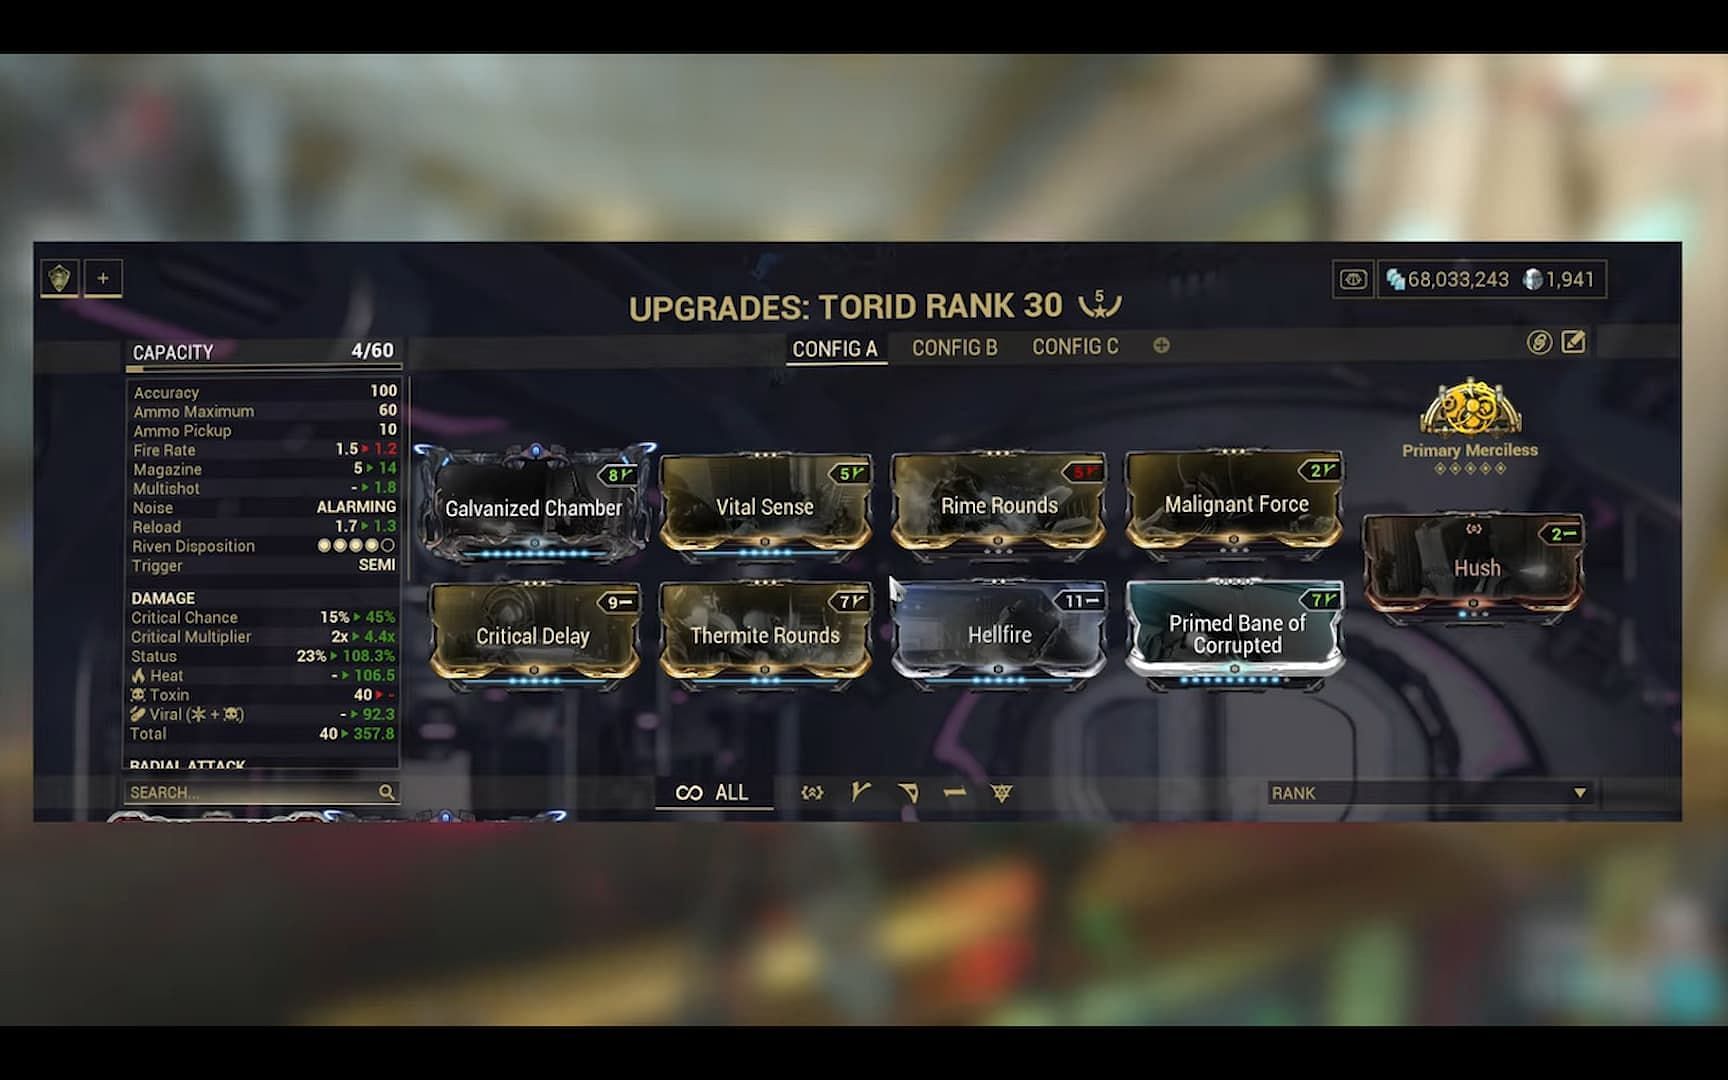 Incarnon Torid build in Warframe using low-level Viral mods for less status weightage (Image via Digital Extremes)